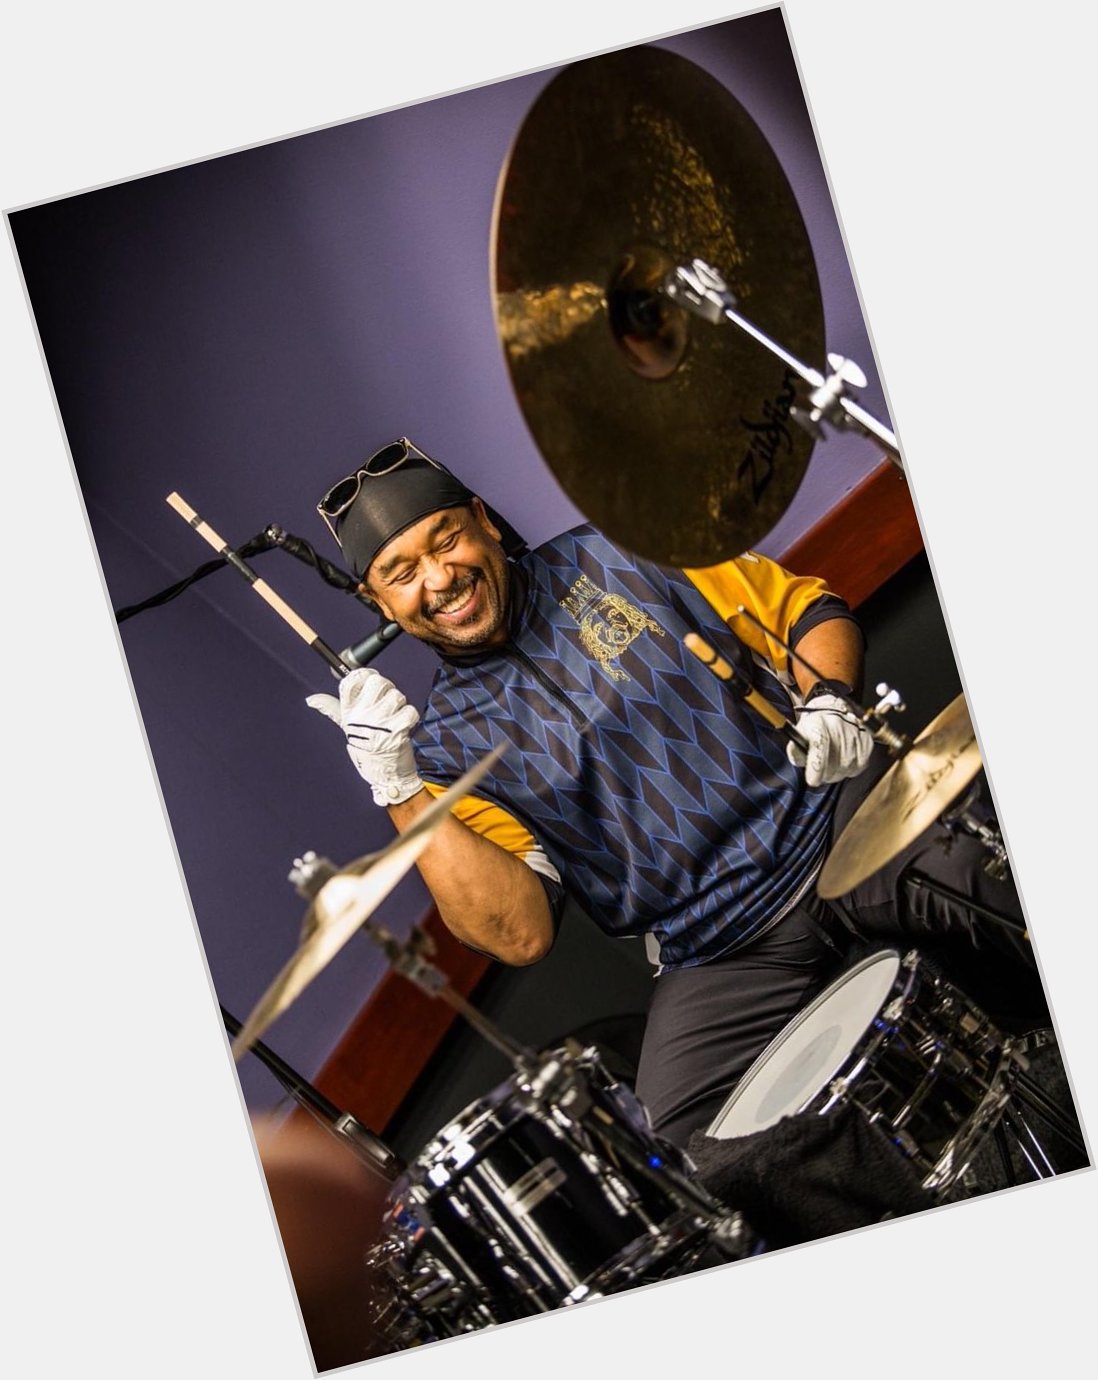 Happy Birthday Carter Beauford!!! I miss you guys. See you in 2021  